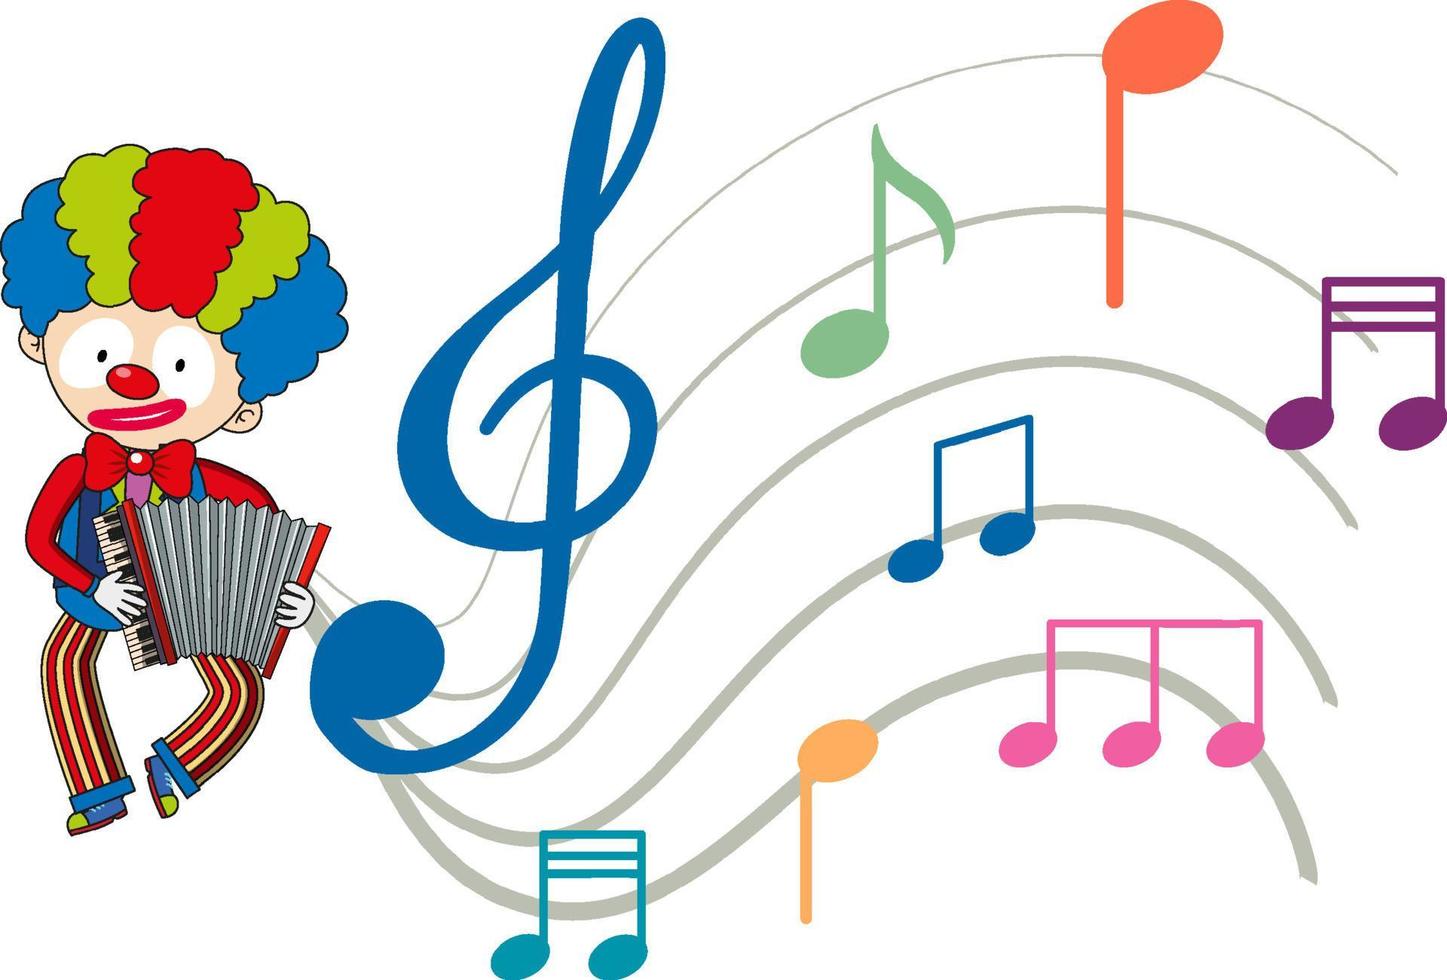 Clown playing accrodion with music notes on white background vector